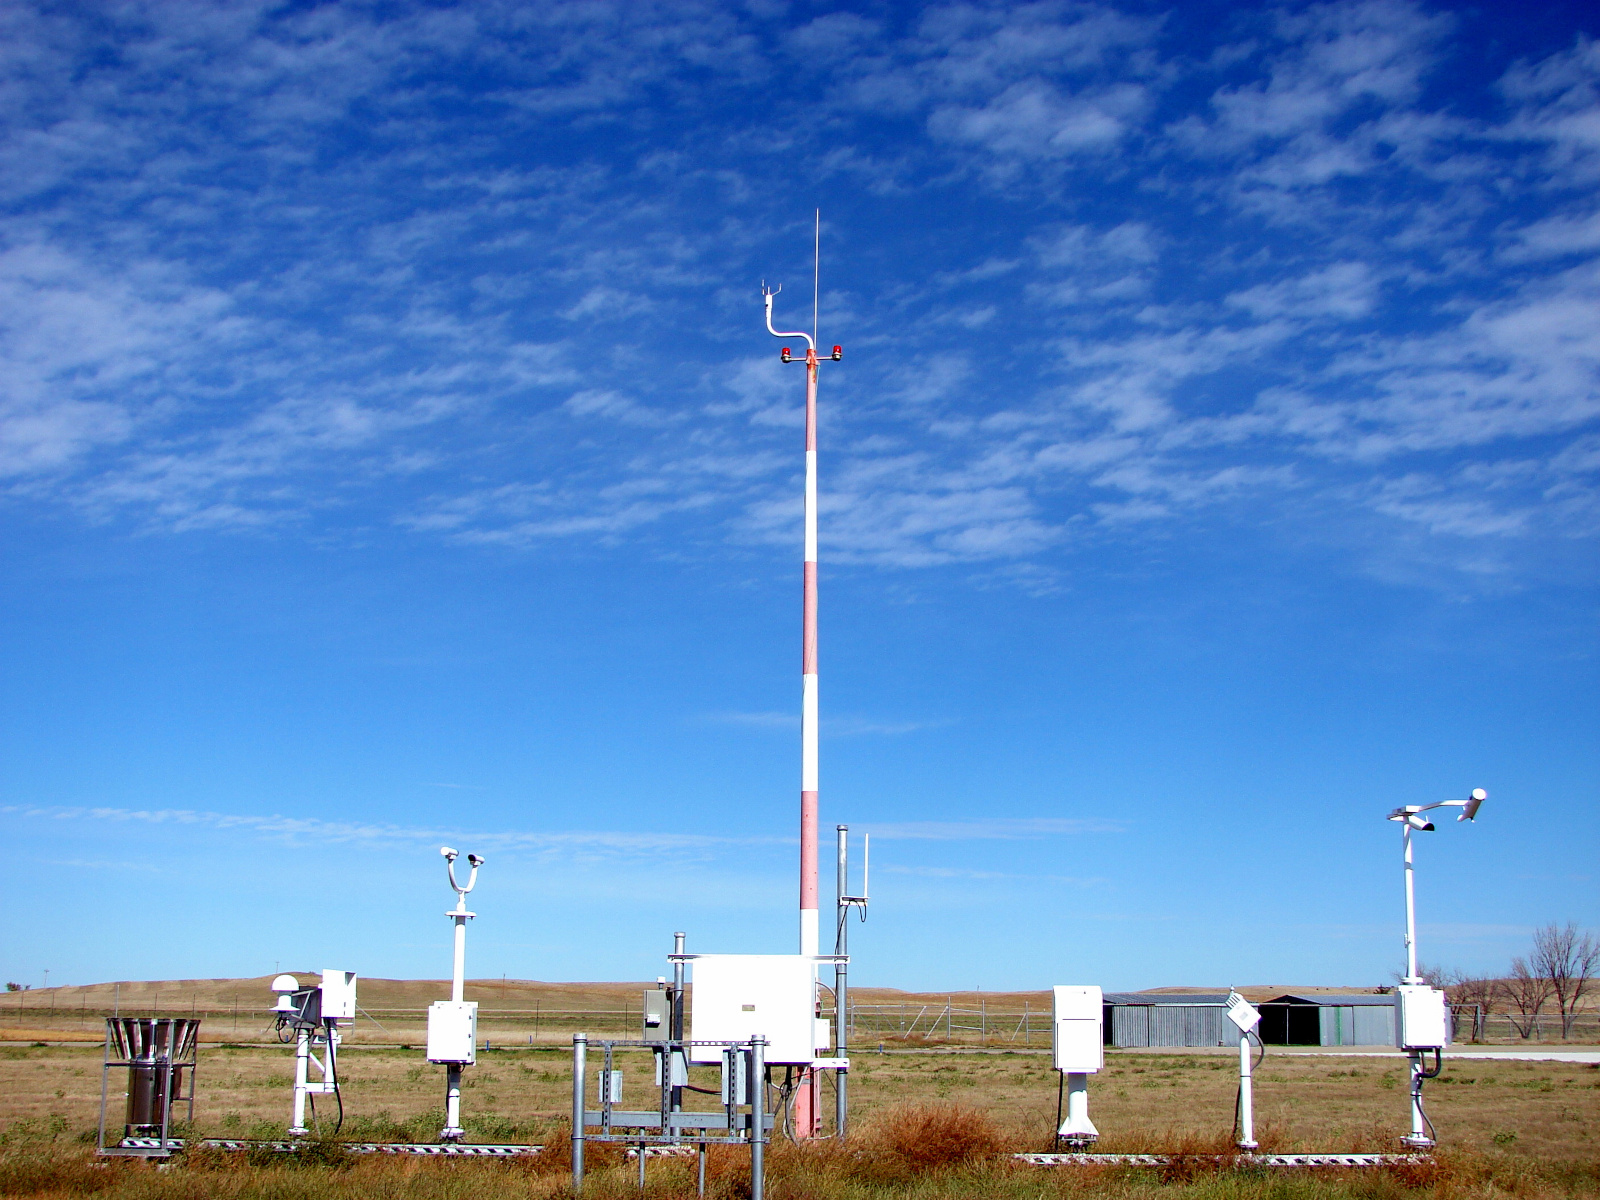 An Automated Weather Observing System (ASOS).